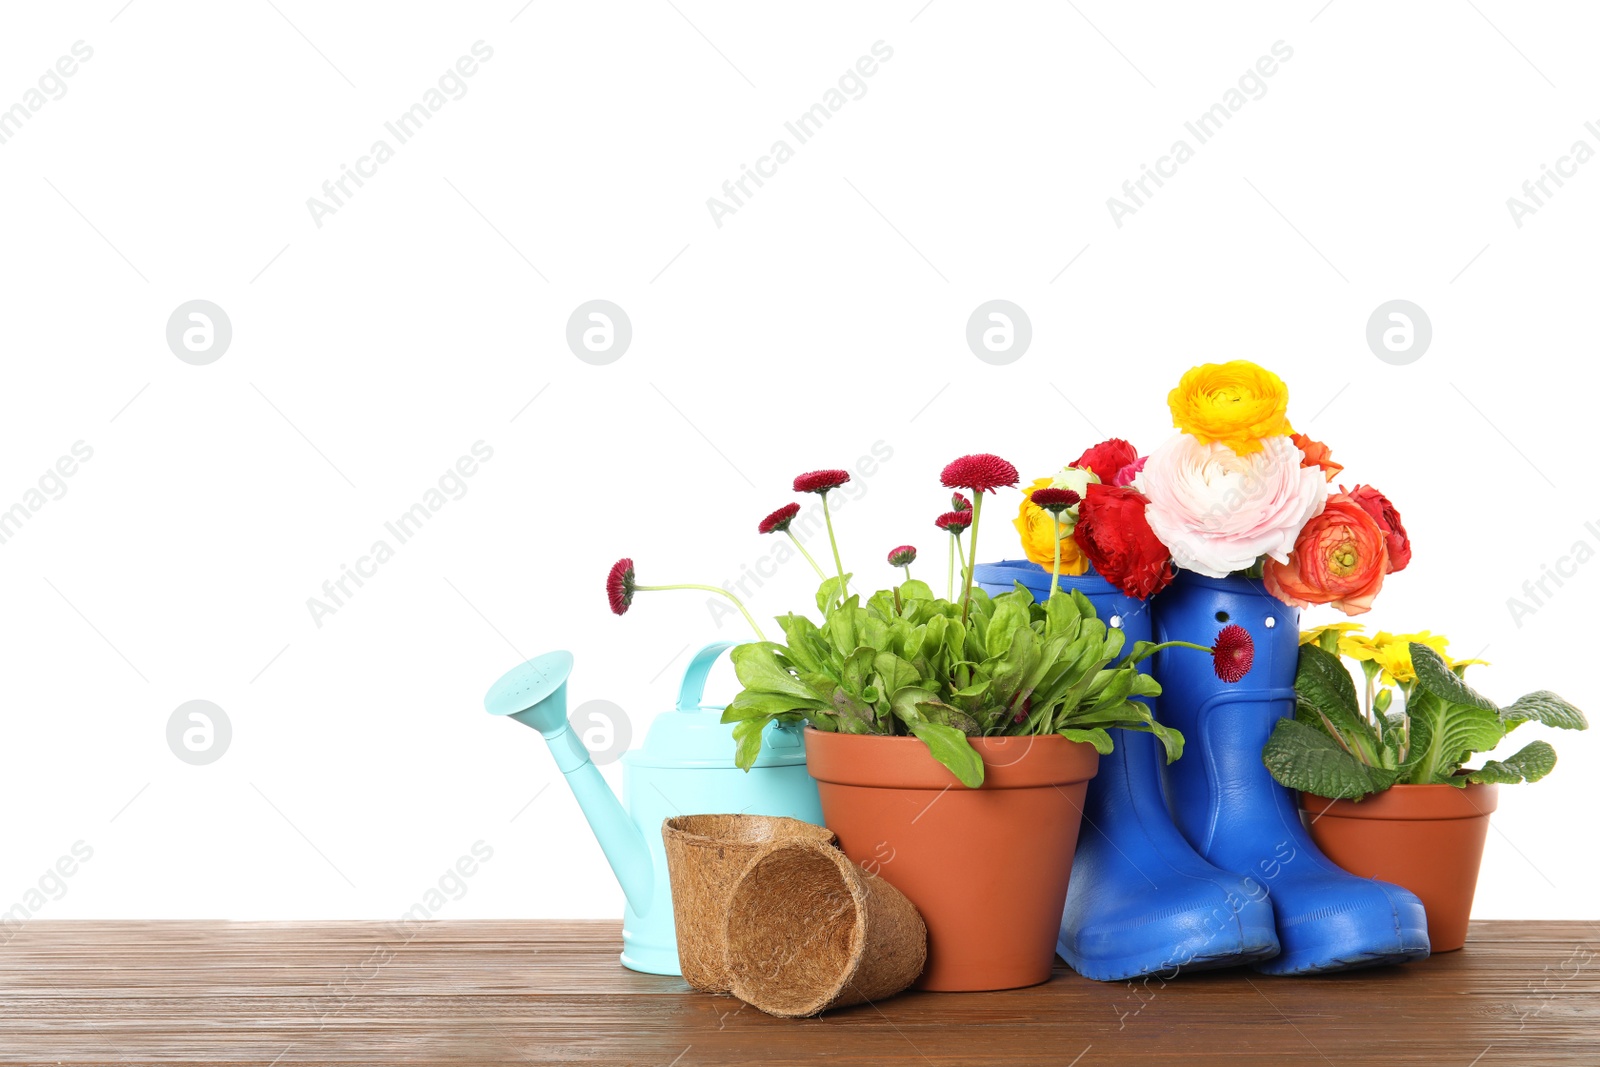 Photo of Potted blooming flowers and gardening equipment on wooden table against white background